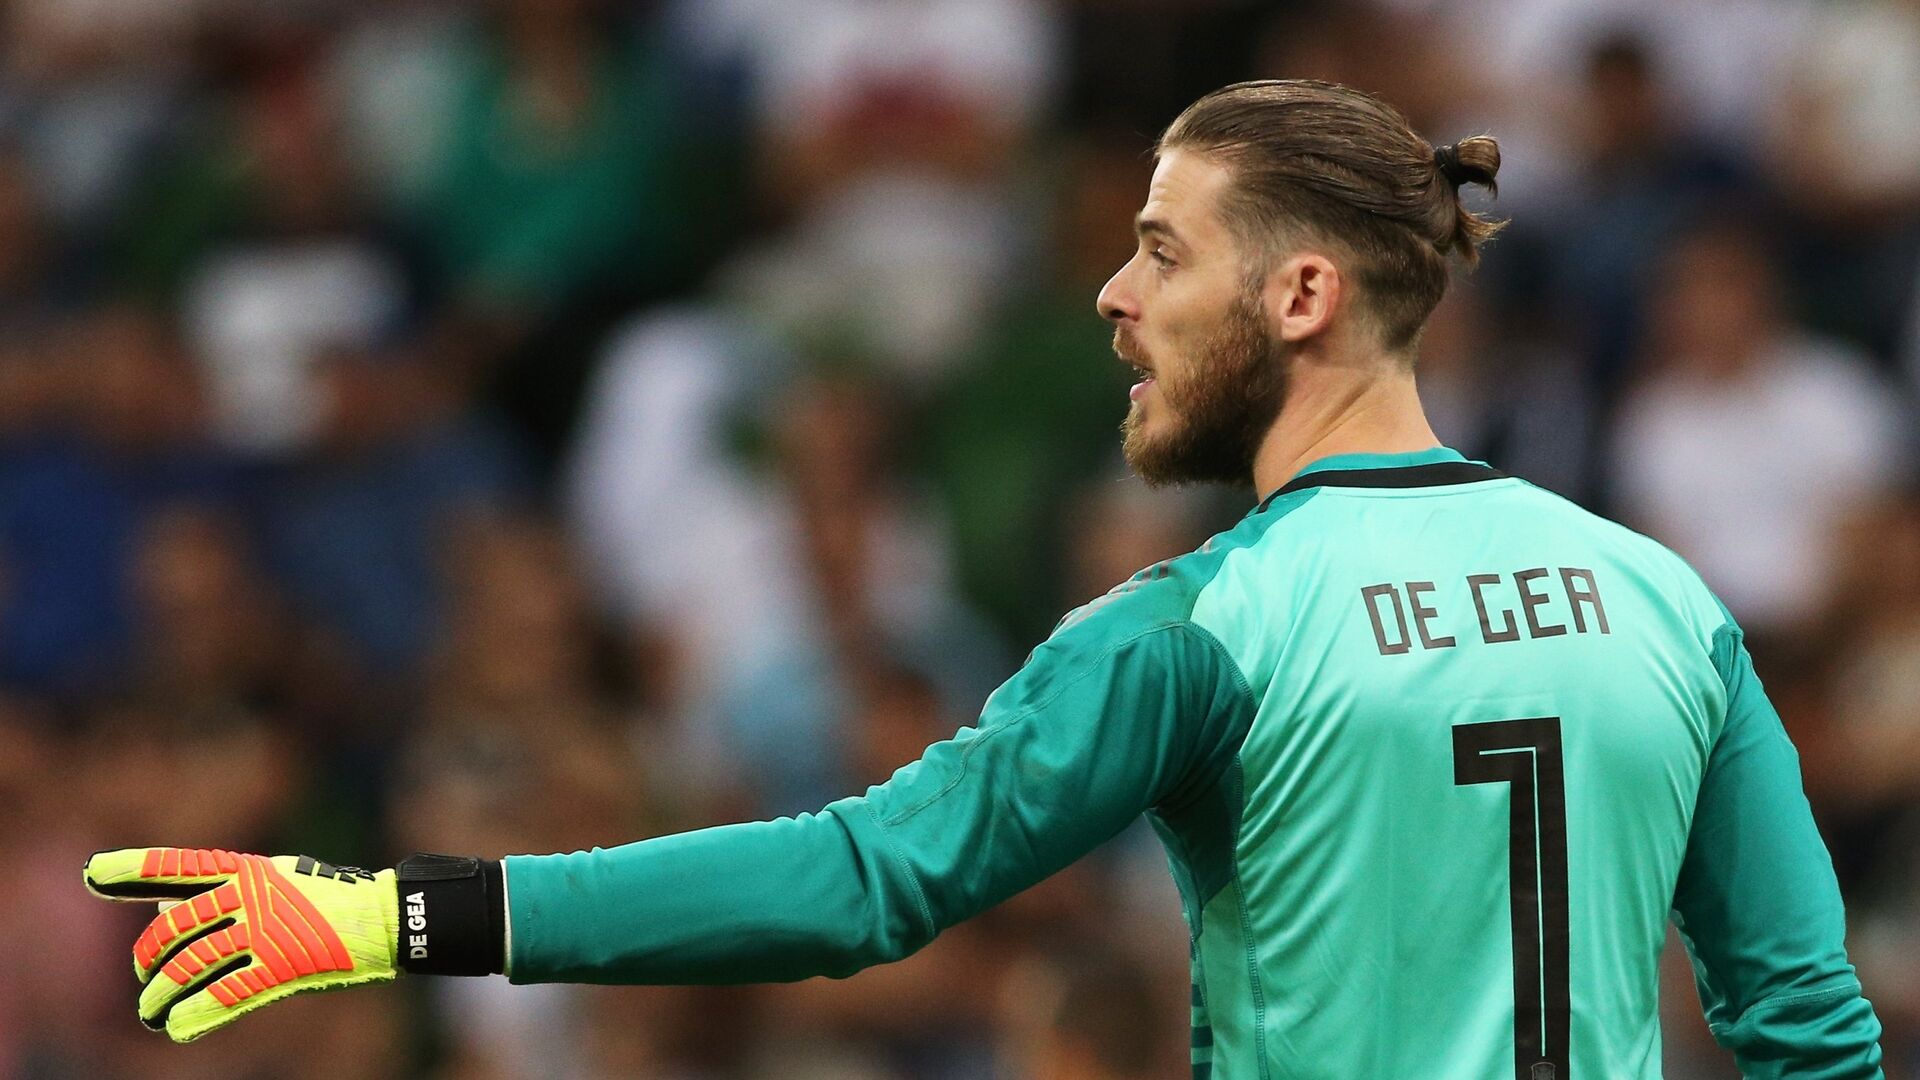 Spain's goalkeeper David de Gea points during a friendly match between Tunisia's and Spain's national soccer teams ahead of the World Cup in Krasnodar, Russia, June 9, 2018 - اسپوتنیک افغانستان  , 1920, 23.02.2022